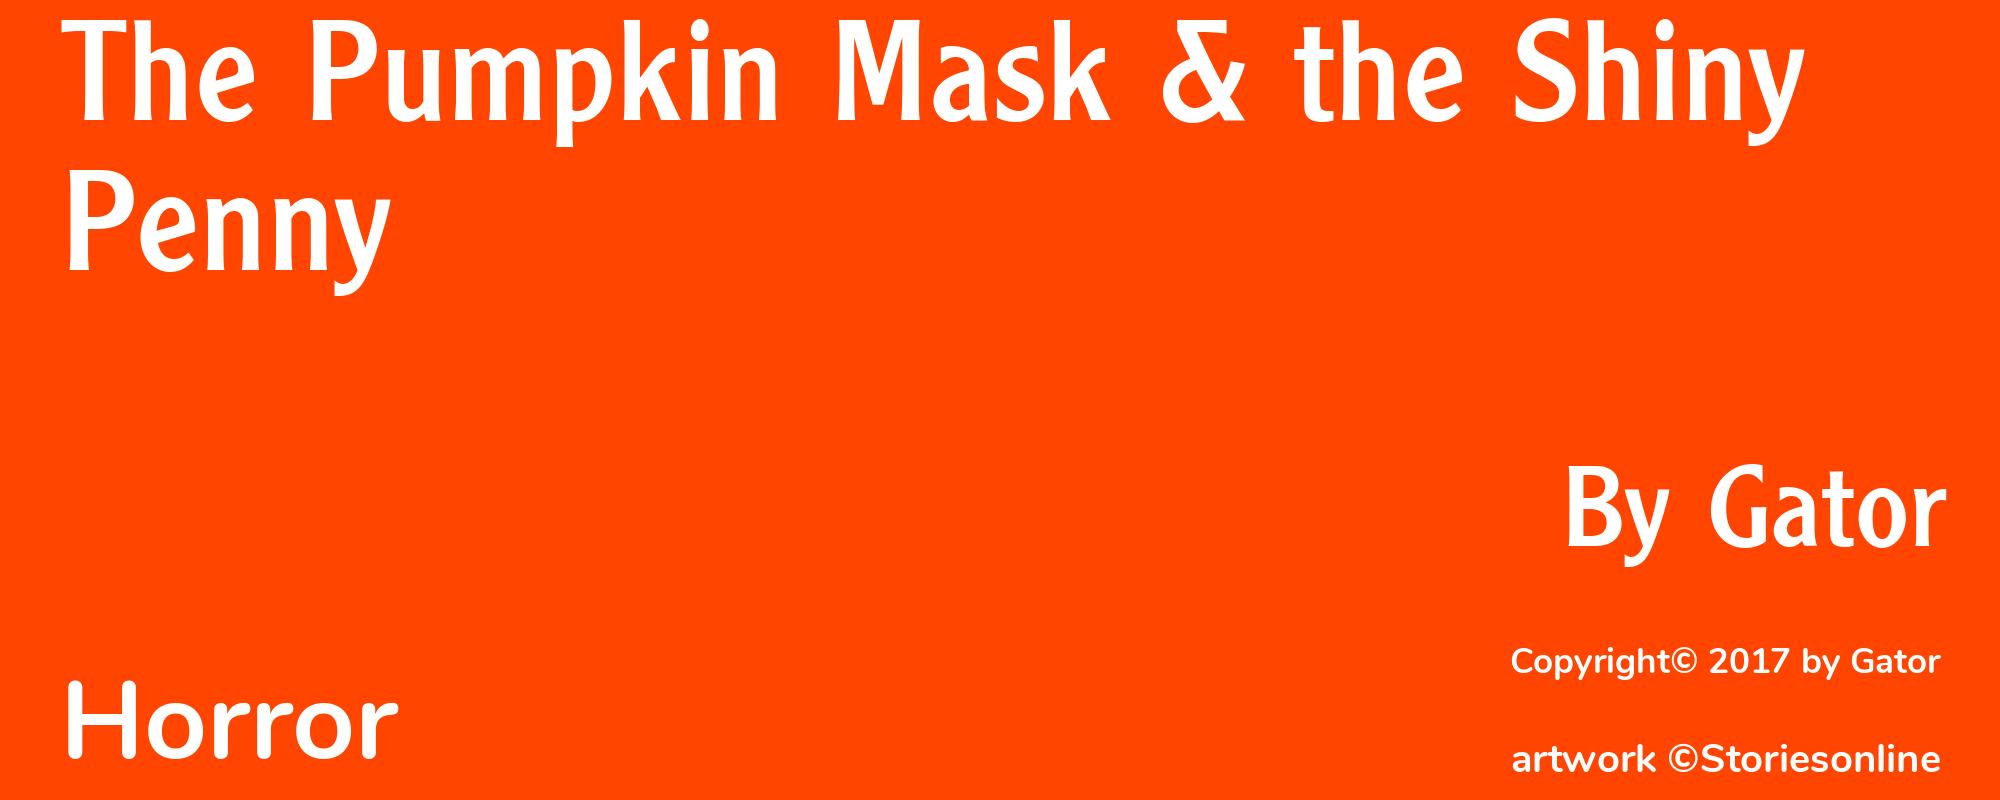 The Pumpkin Mask & the Shiny Penny - Cover